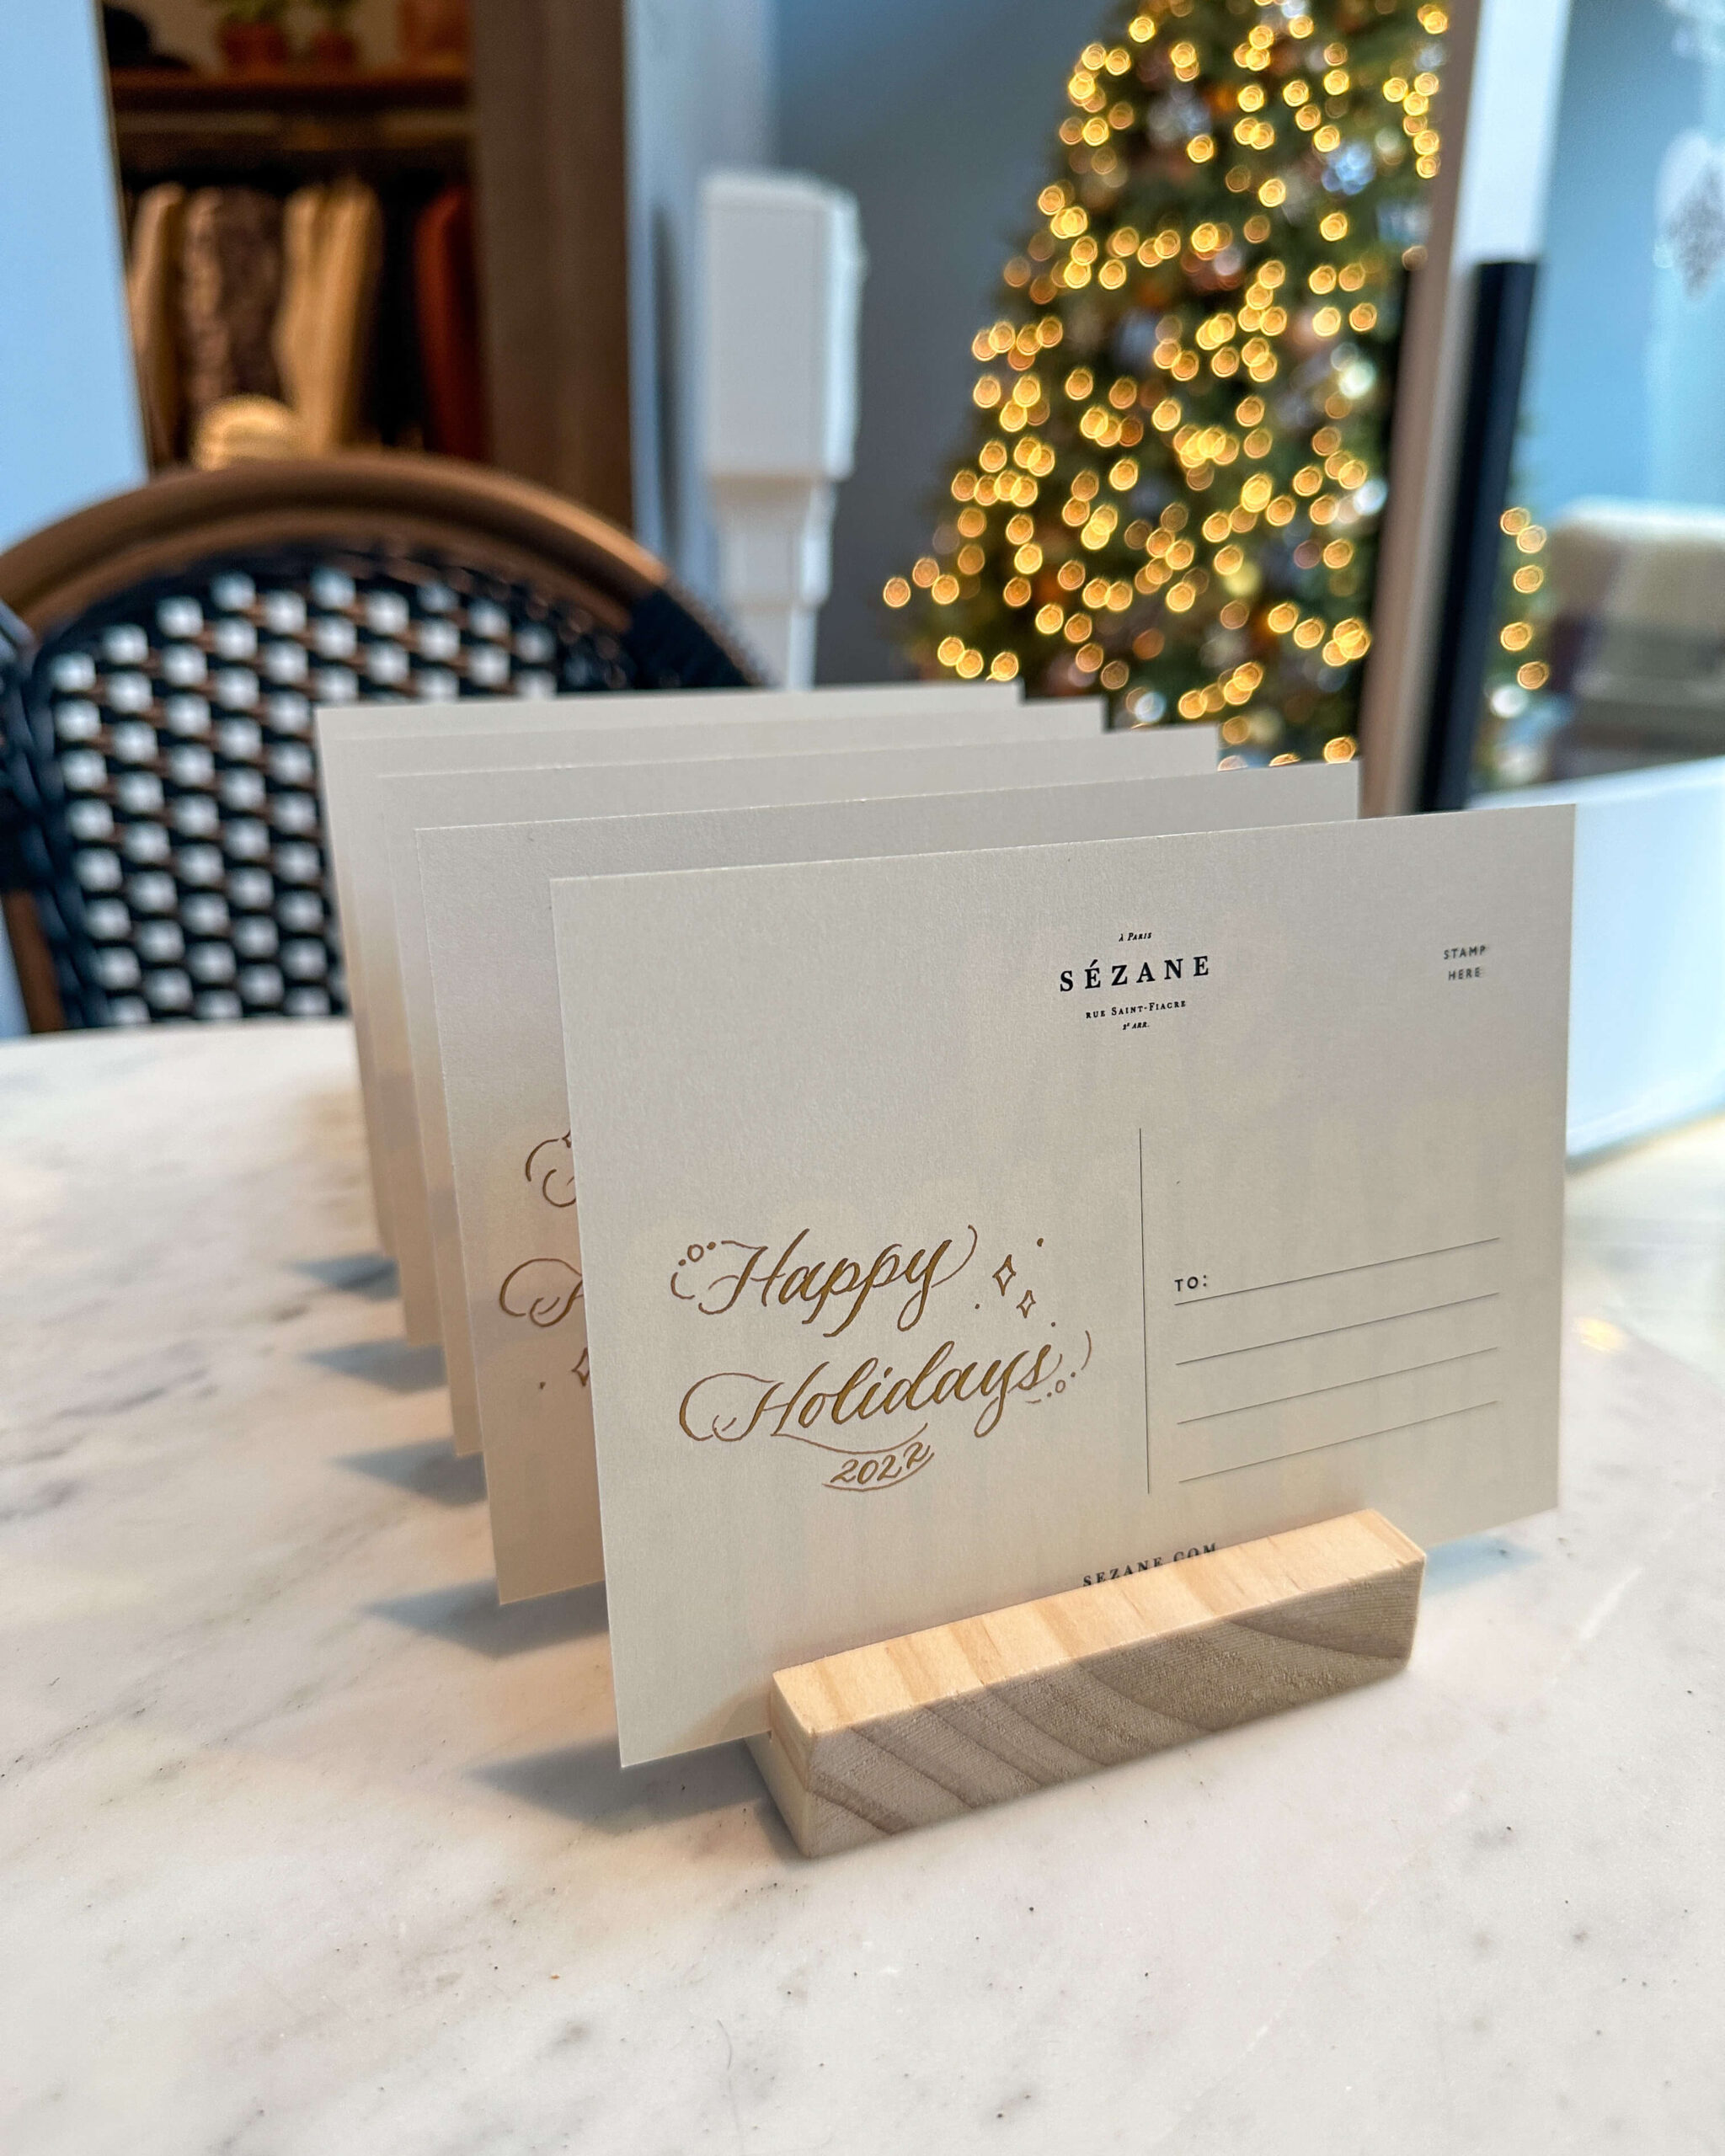 Handwritten calligraphy that says "Happy Holidays" in gold on branded post cards.